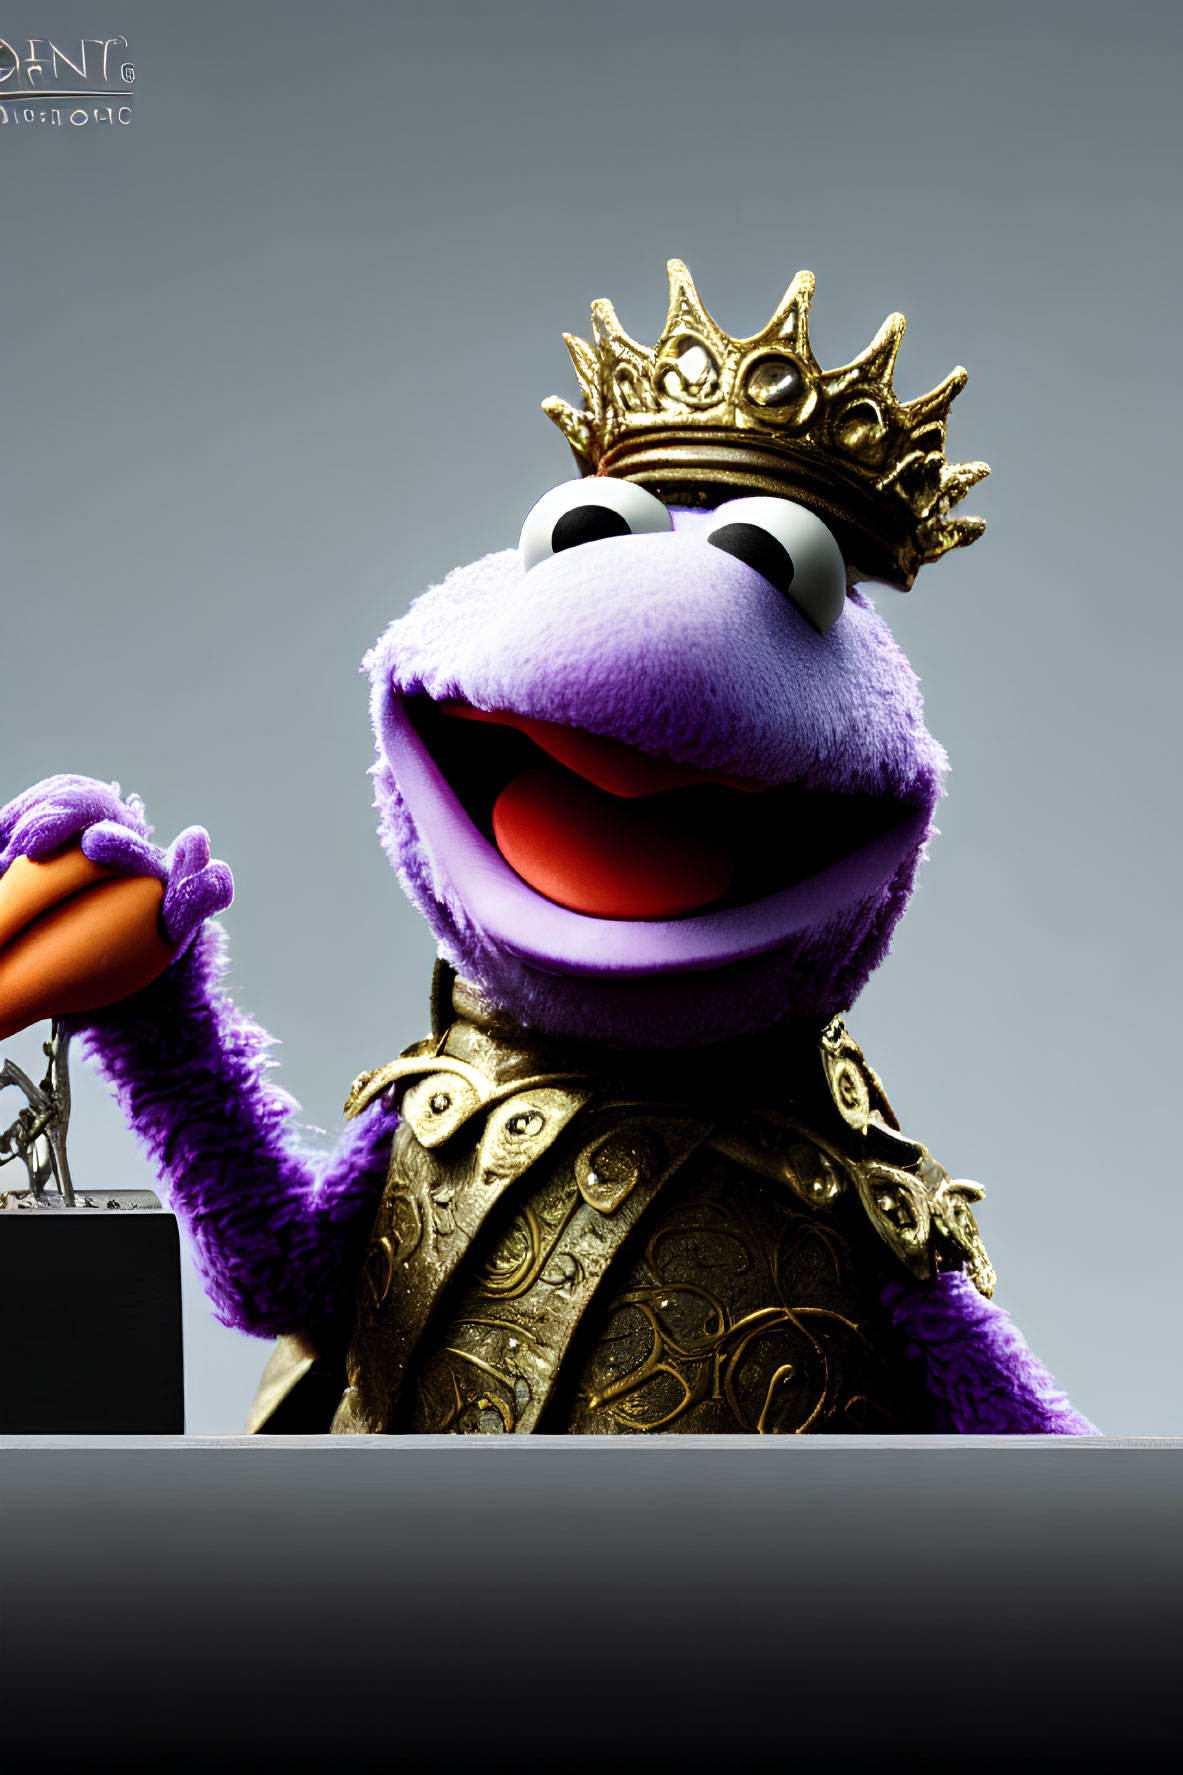 Purple King Puppet with Golden Crown and Armor on Dark Background